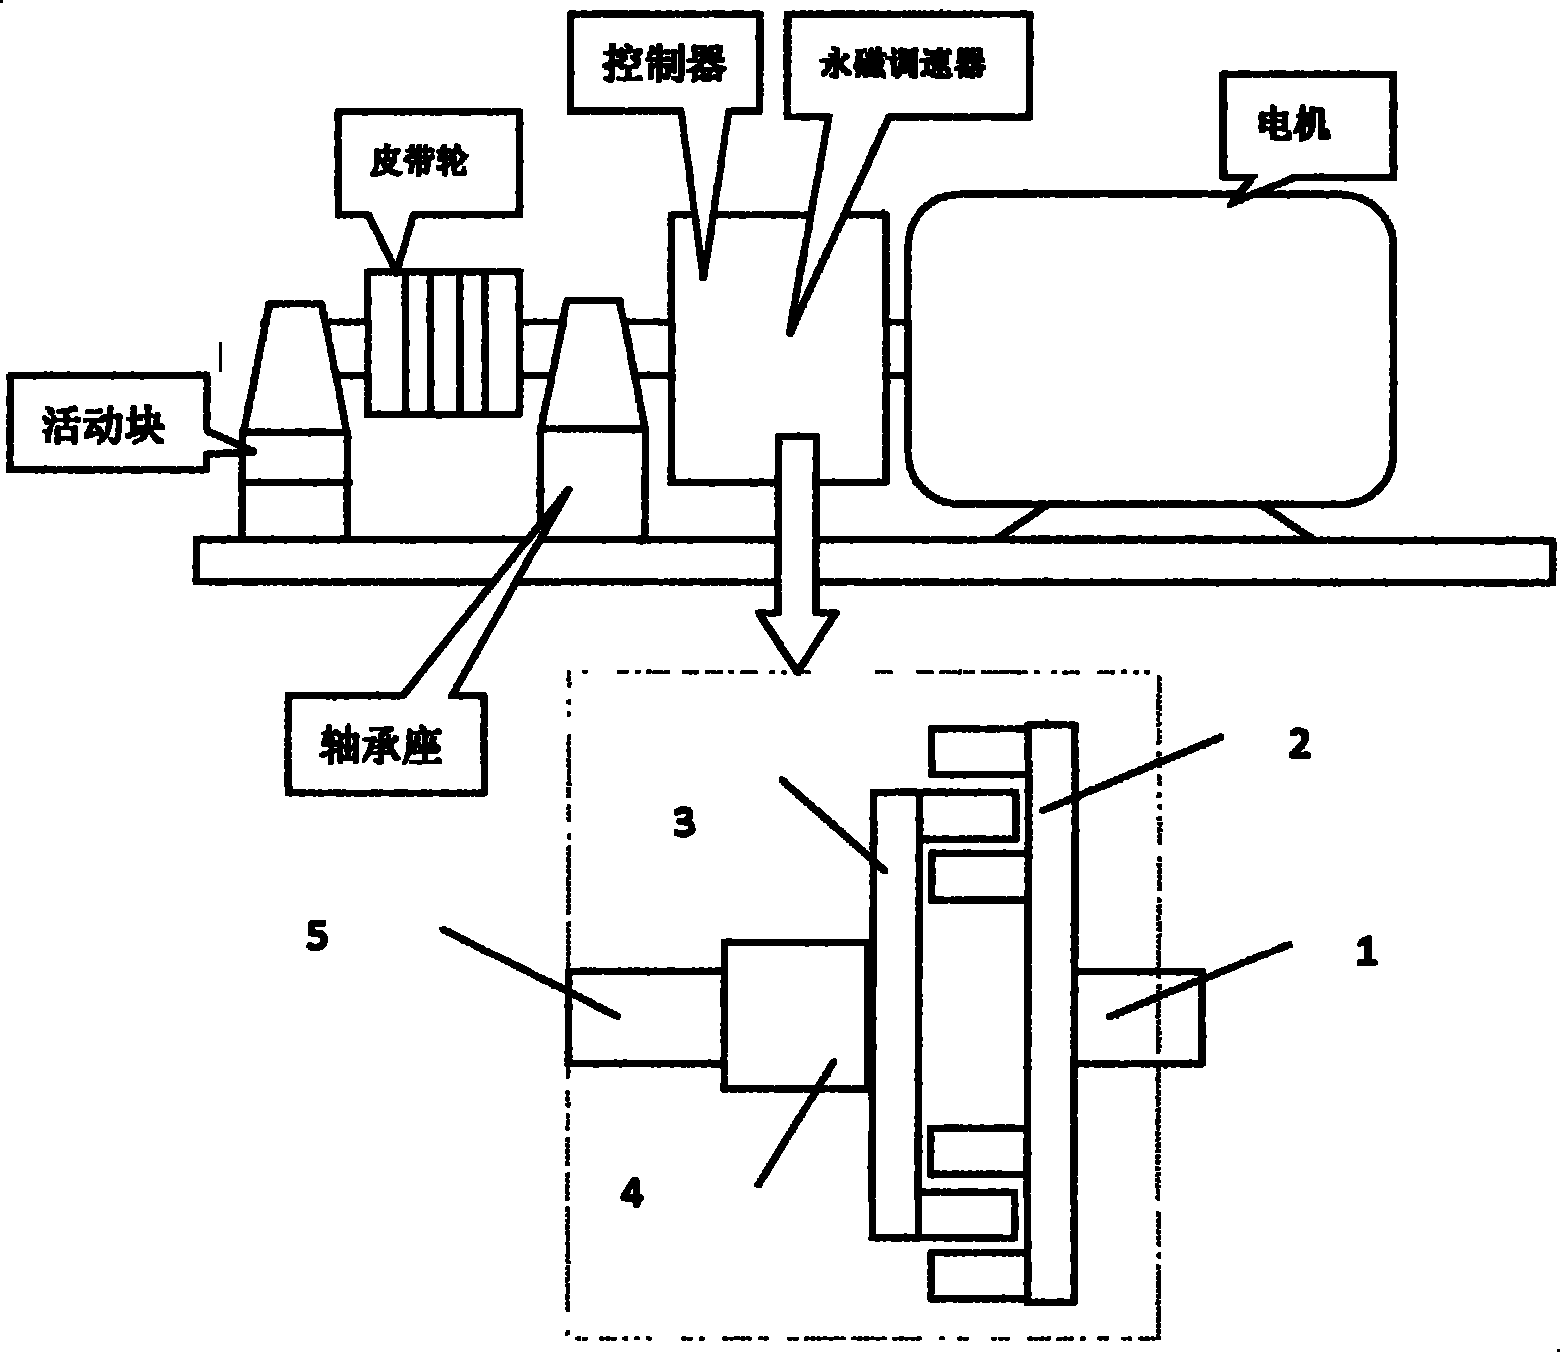 Pumping unit permanent magnet speed regulation and energy conservation device